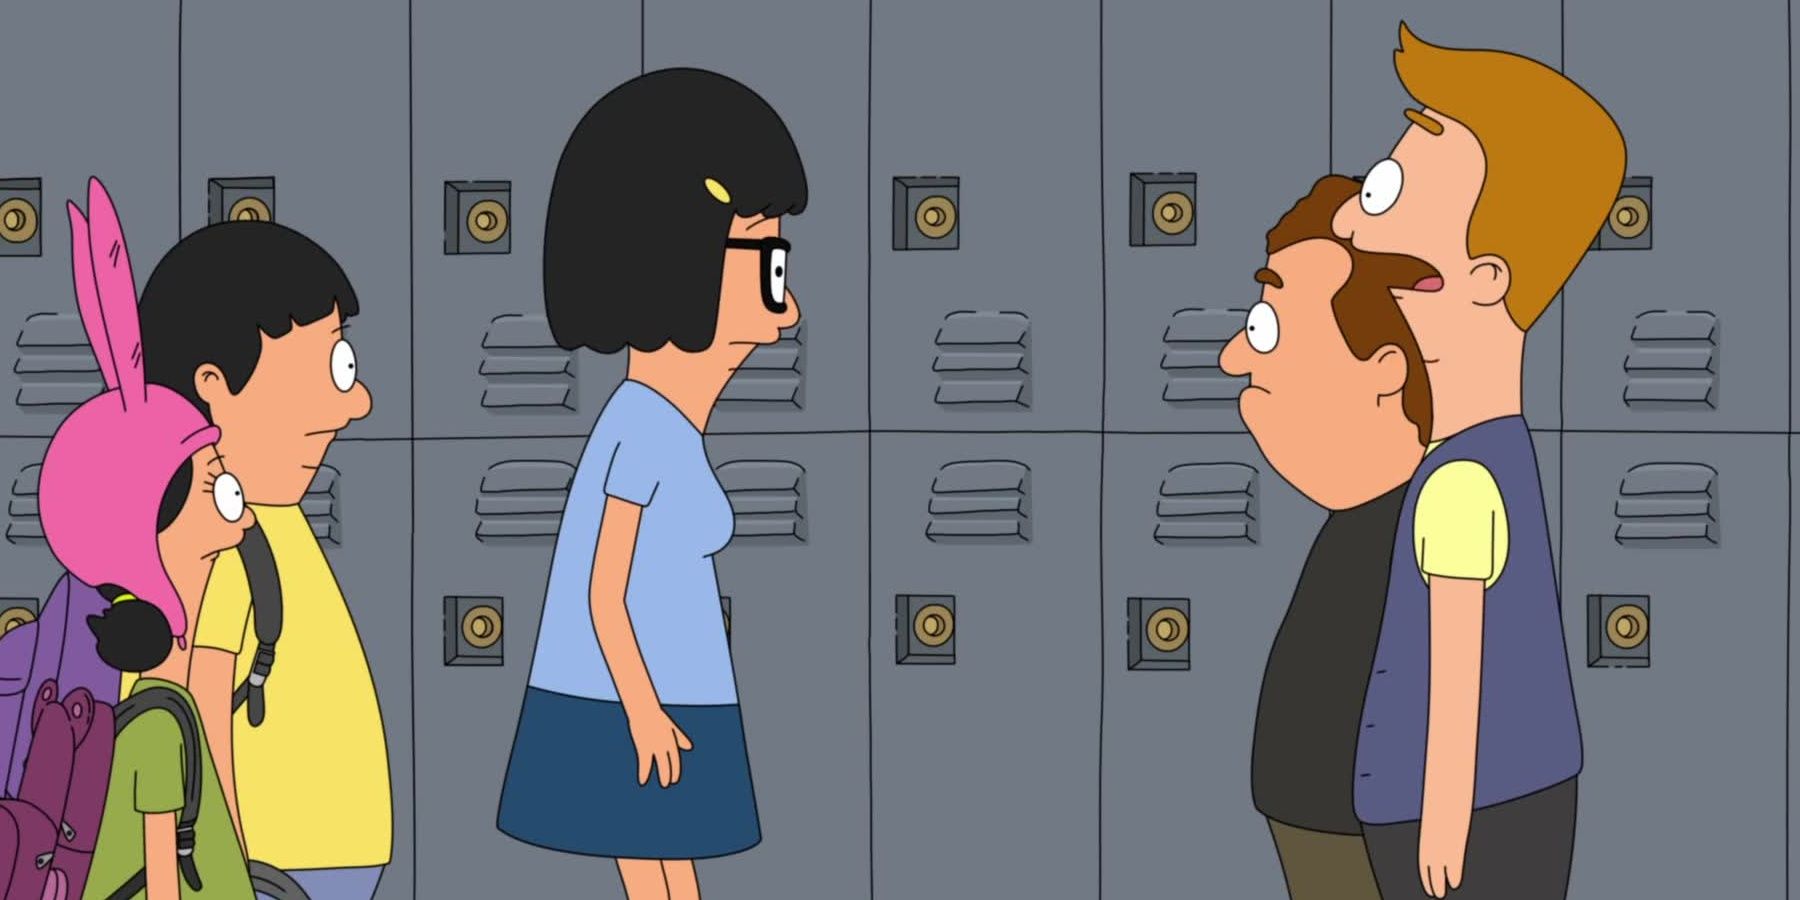 Bobs Burgers 10 Quotes About Friendship From Jimmy Jr & Zeke